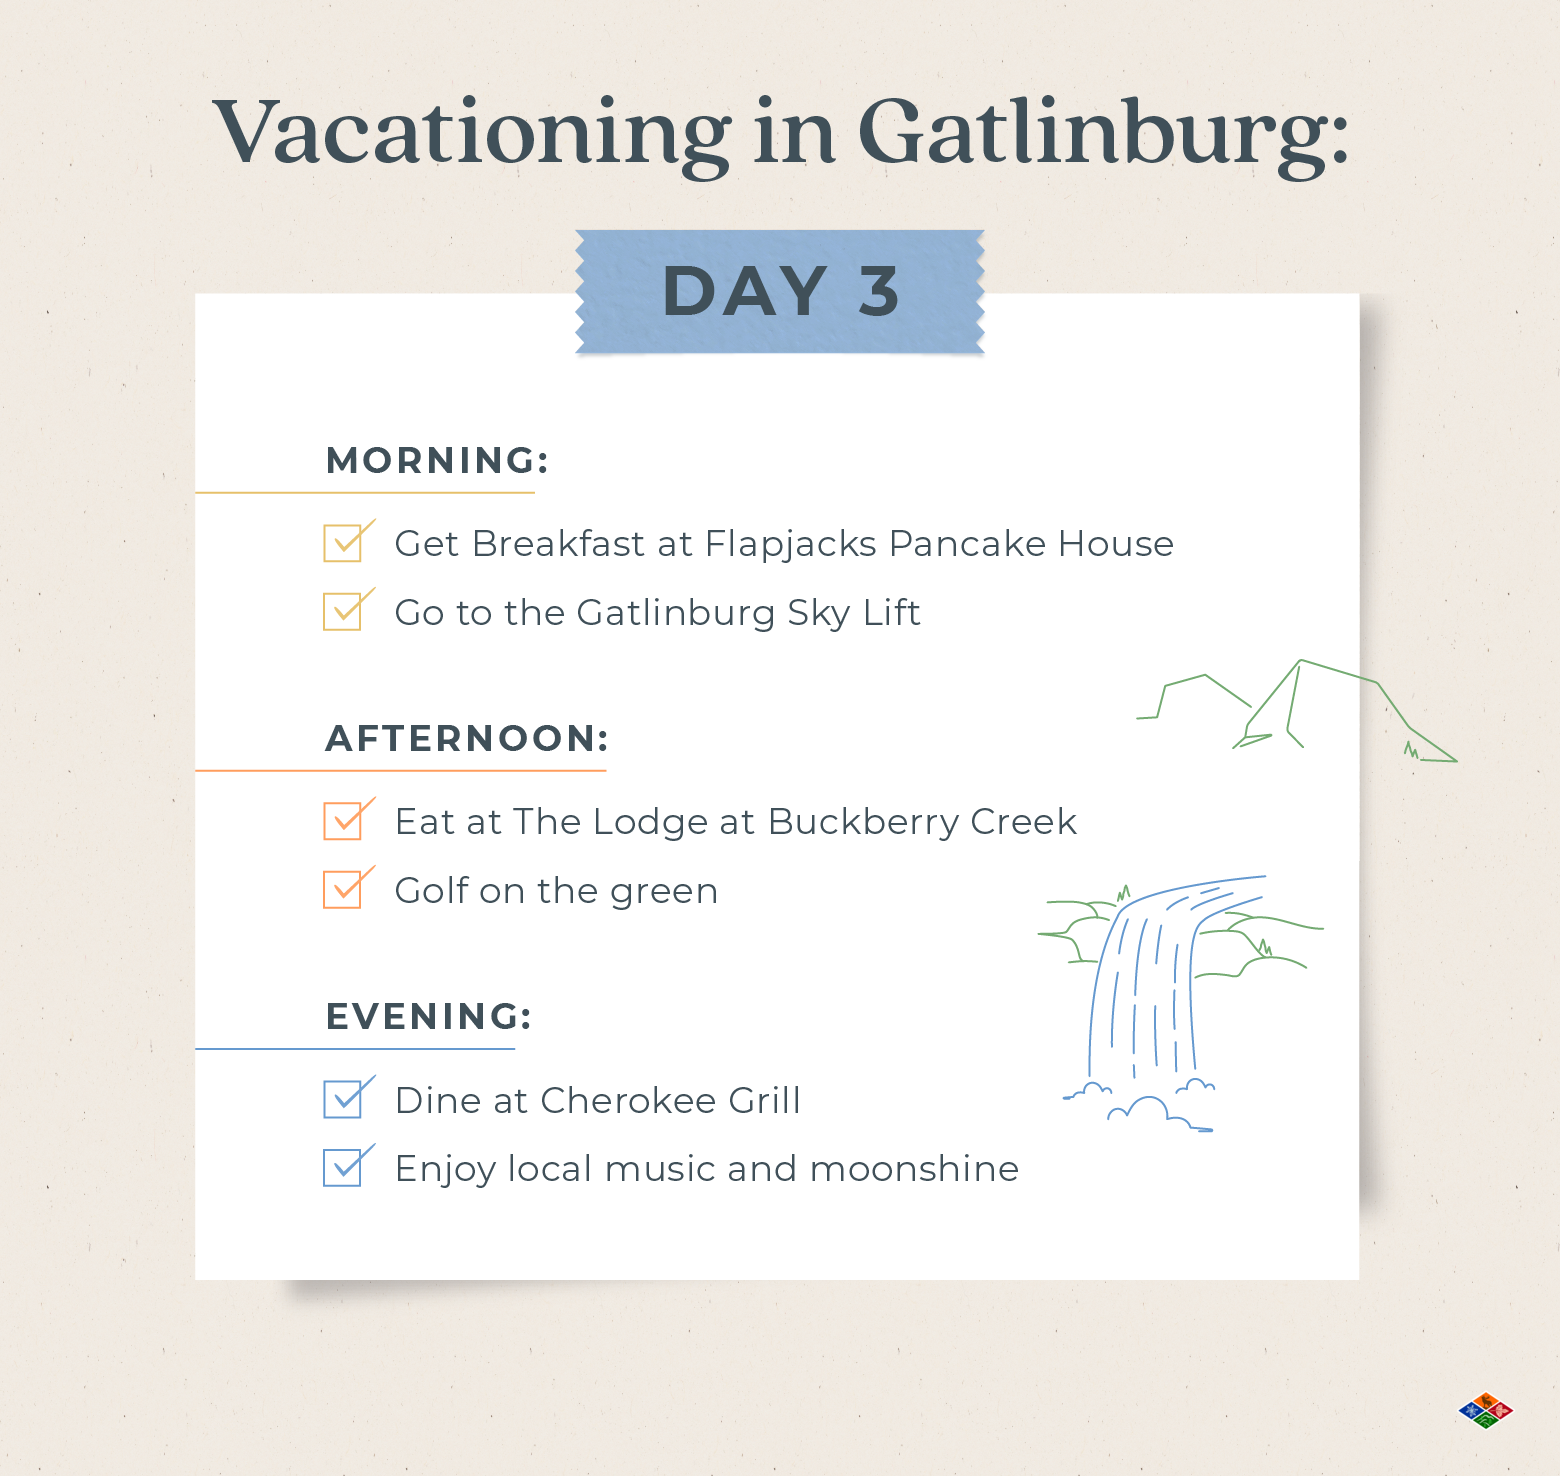 A graphic shows the day three itinerary for vacationing in Gatlinburg.